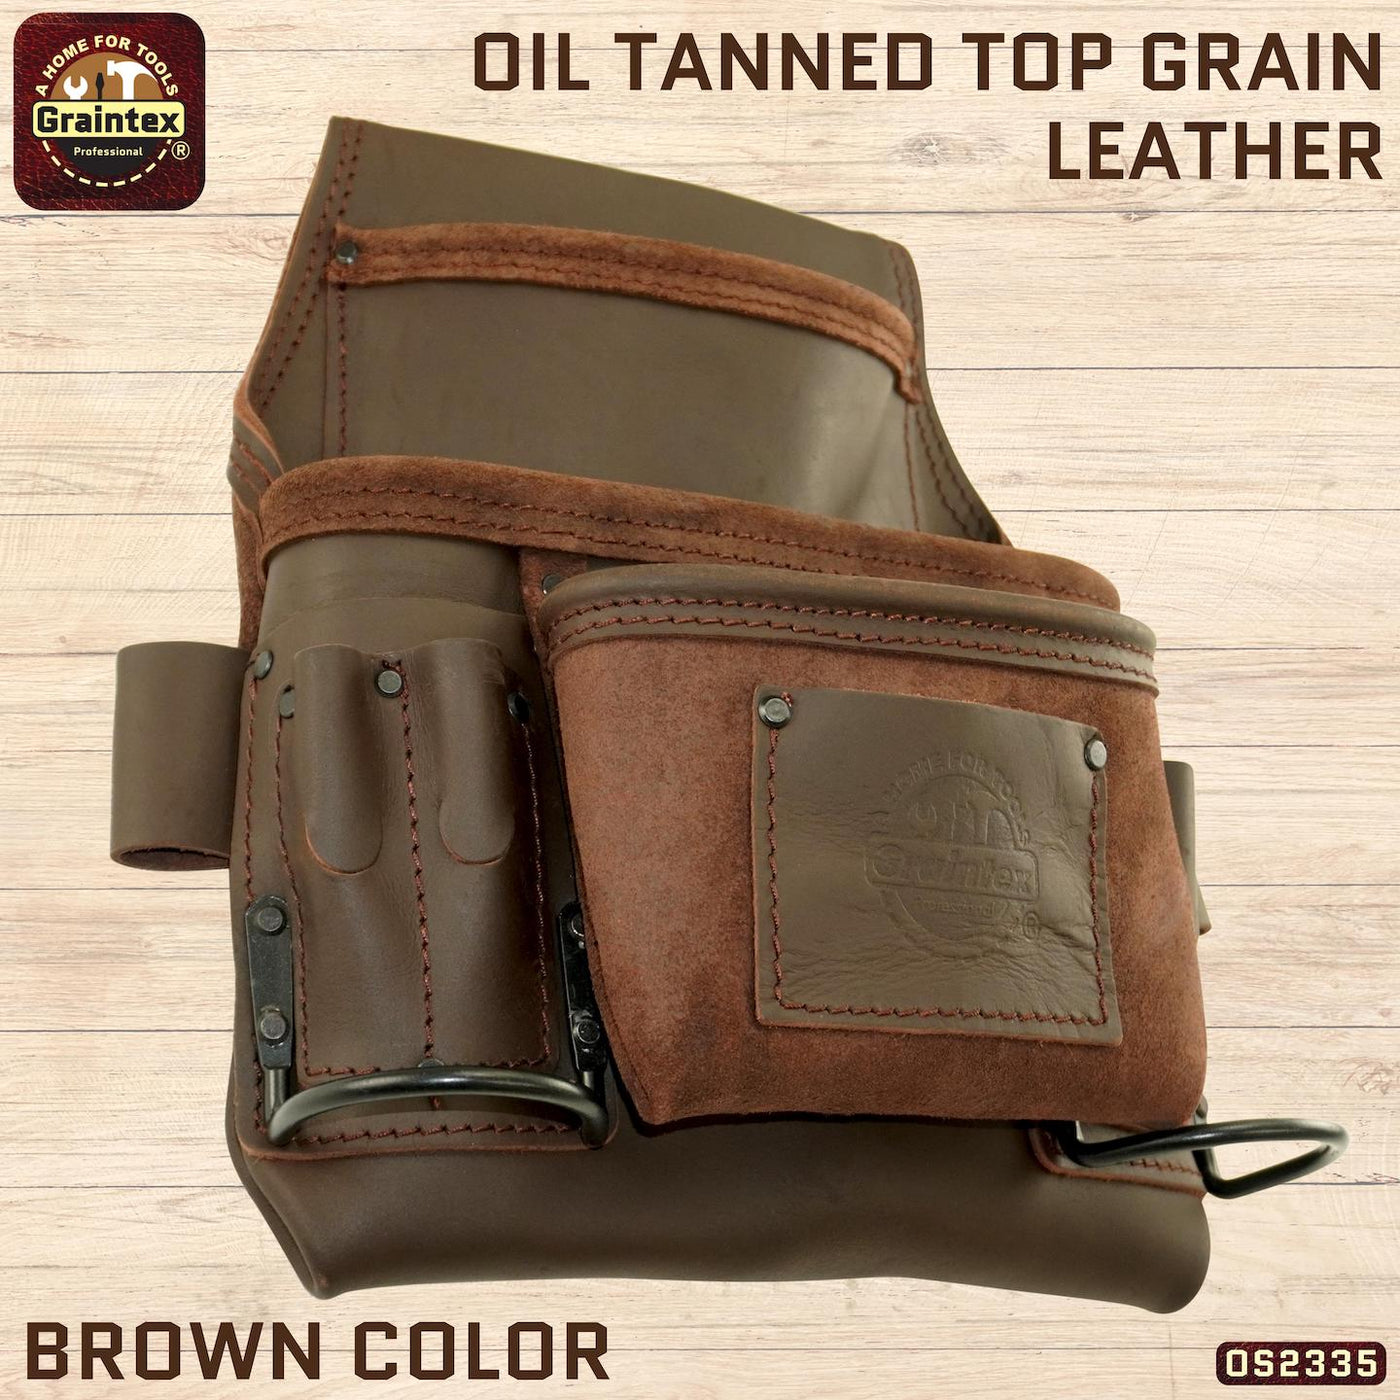 OS2335 :: 9 Pocket Nail & Tool Pouch Brown Color Top Grain Oil Tanned Leather